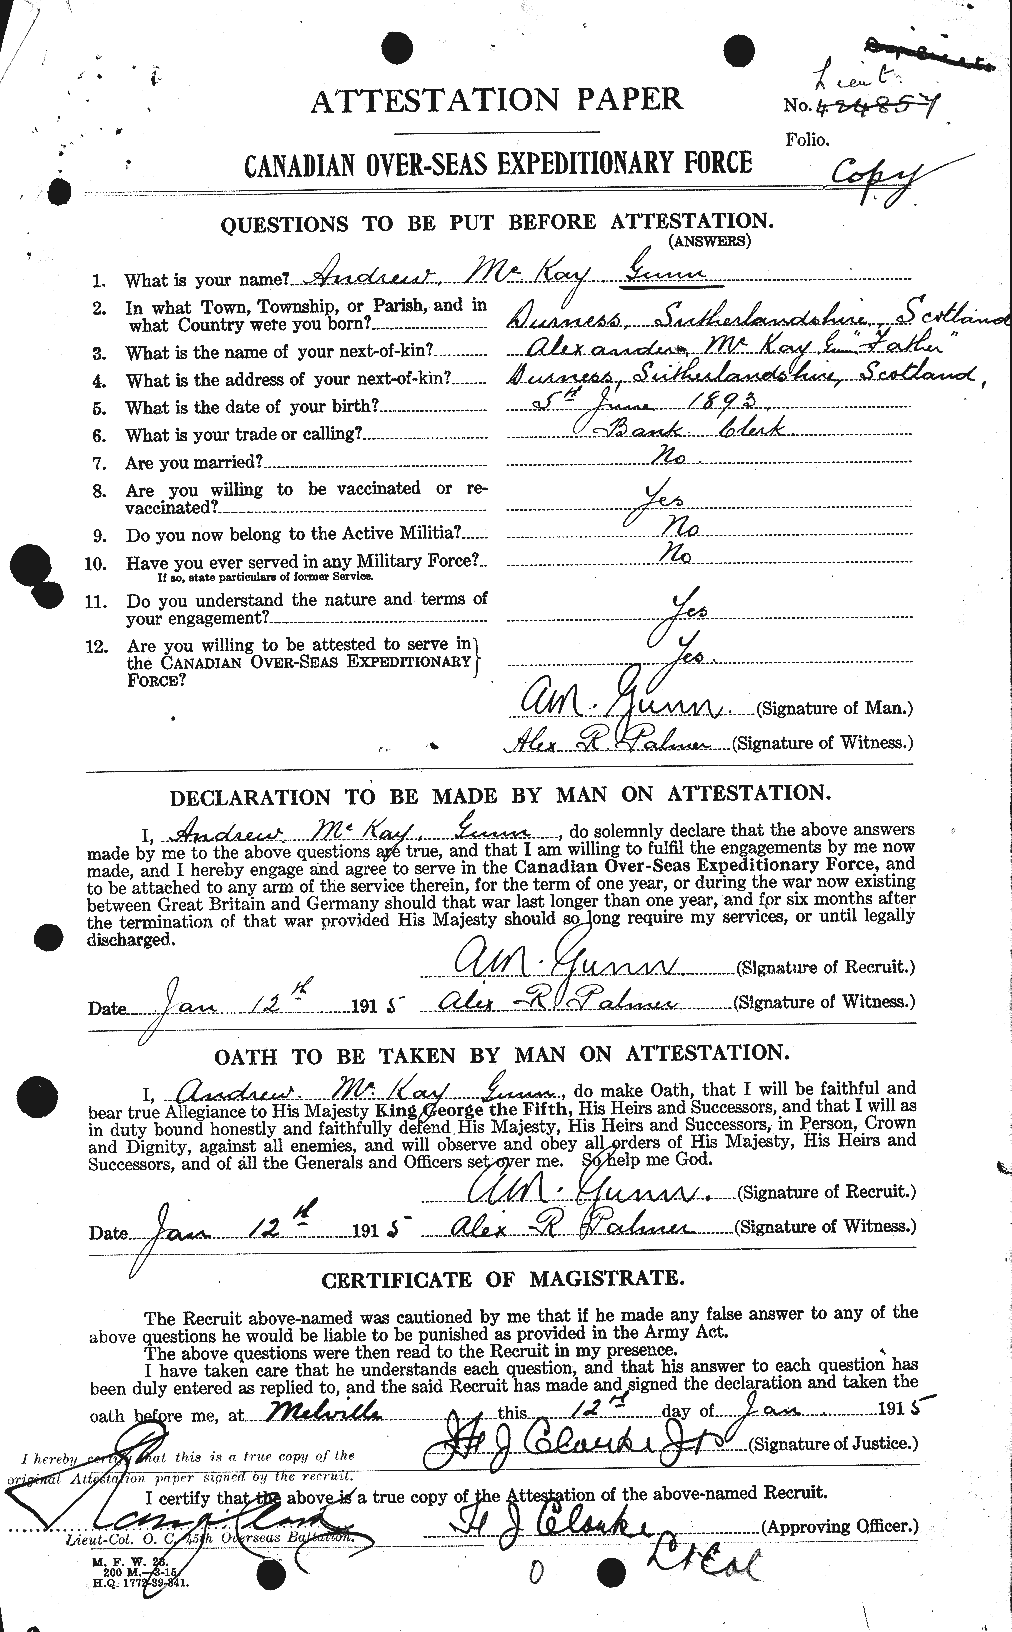 Personnel Records of the First World War - CEF 367995a